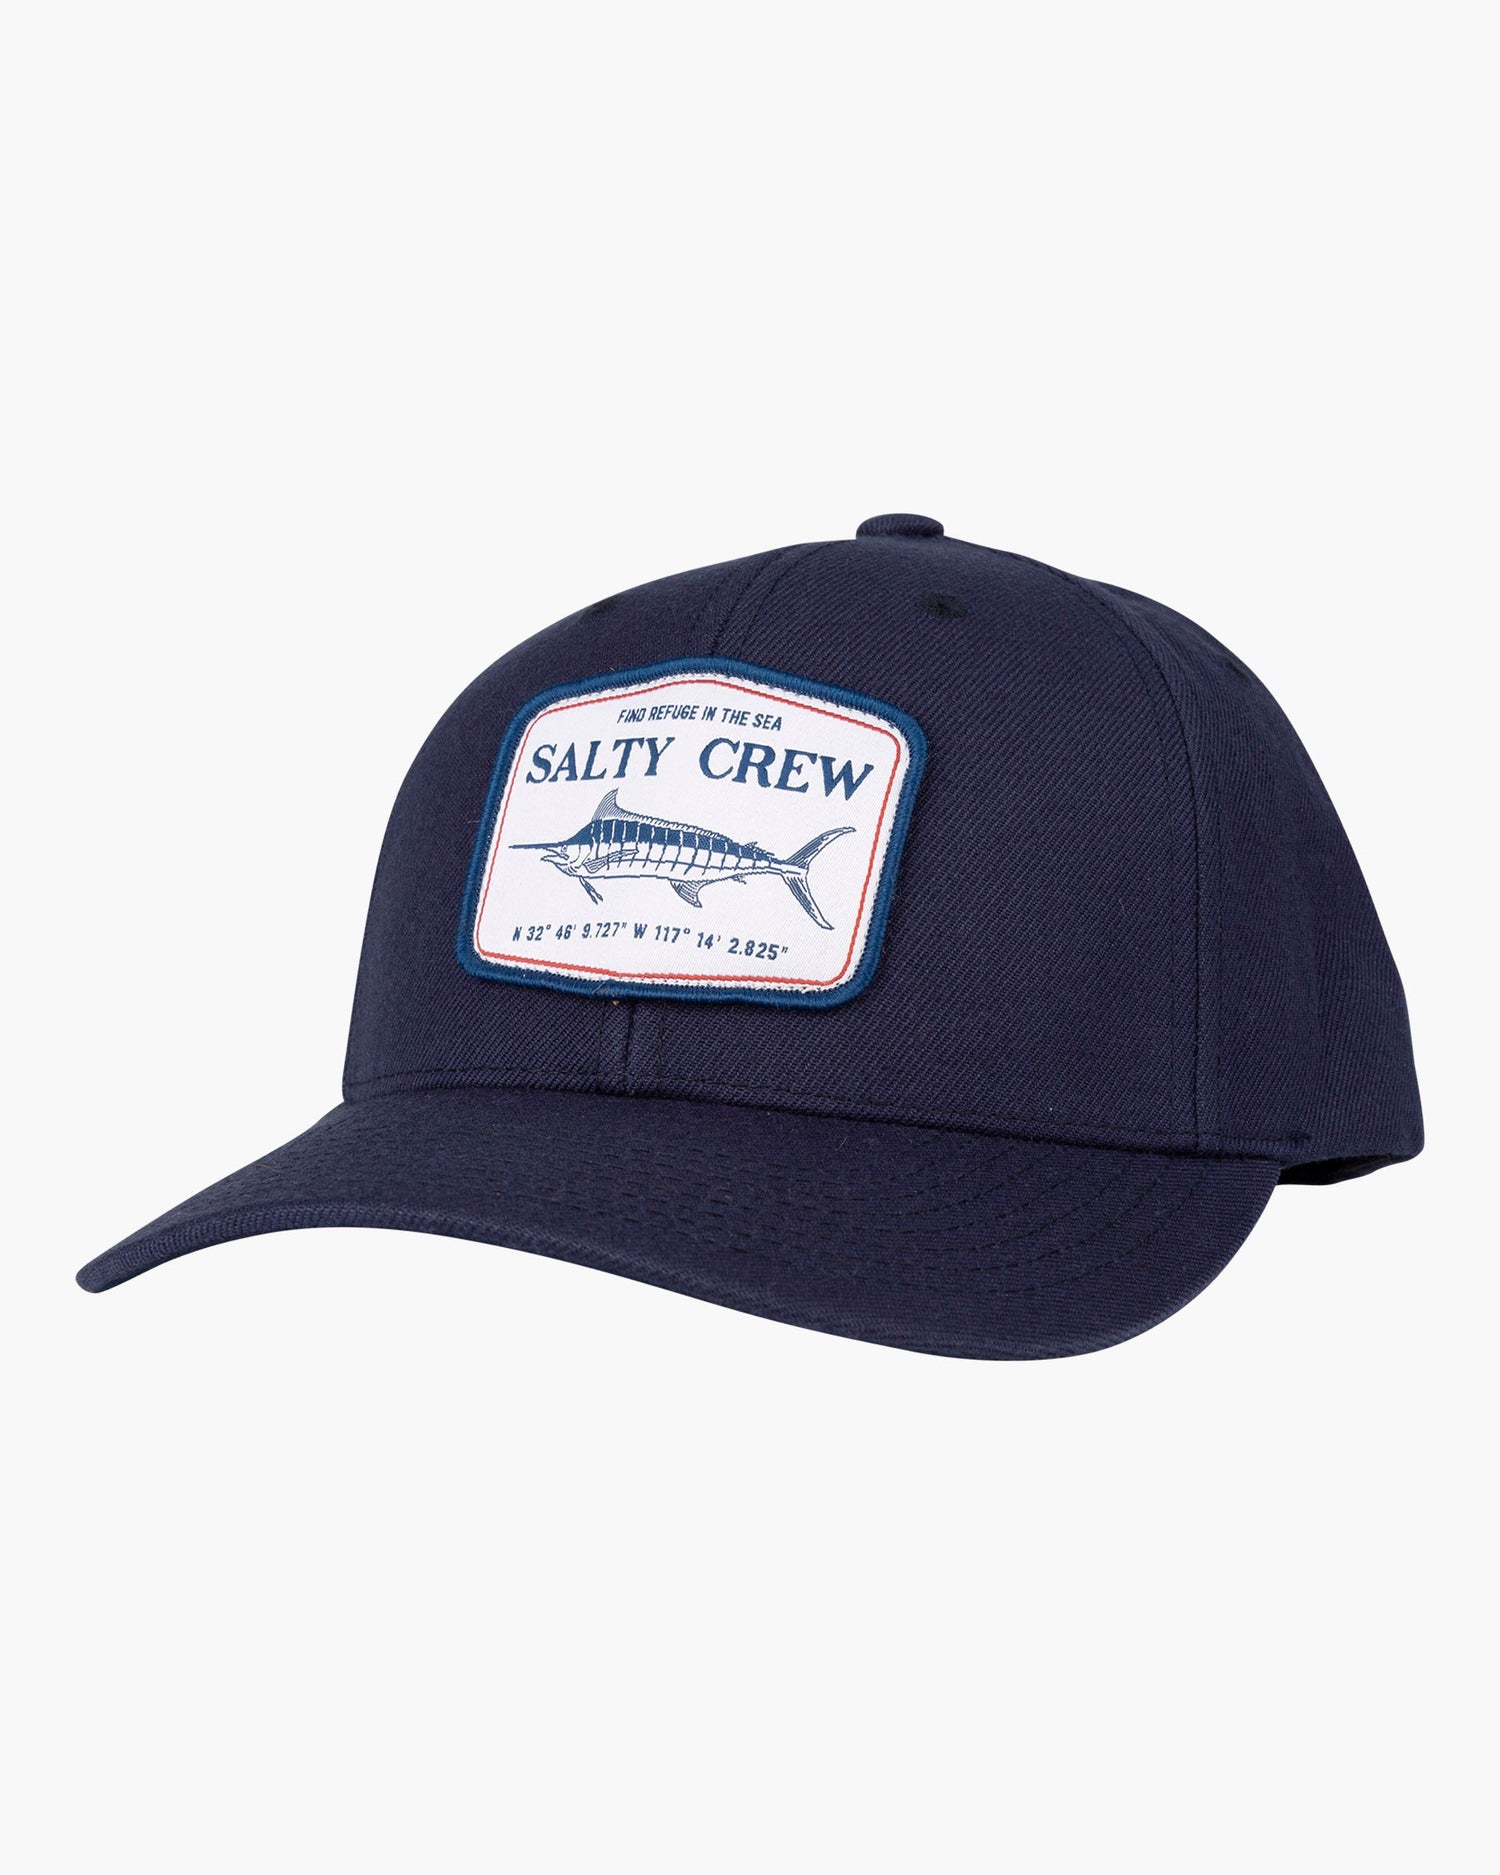 STEALTH 6 PANEL - Navy